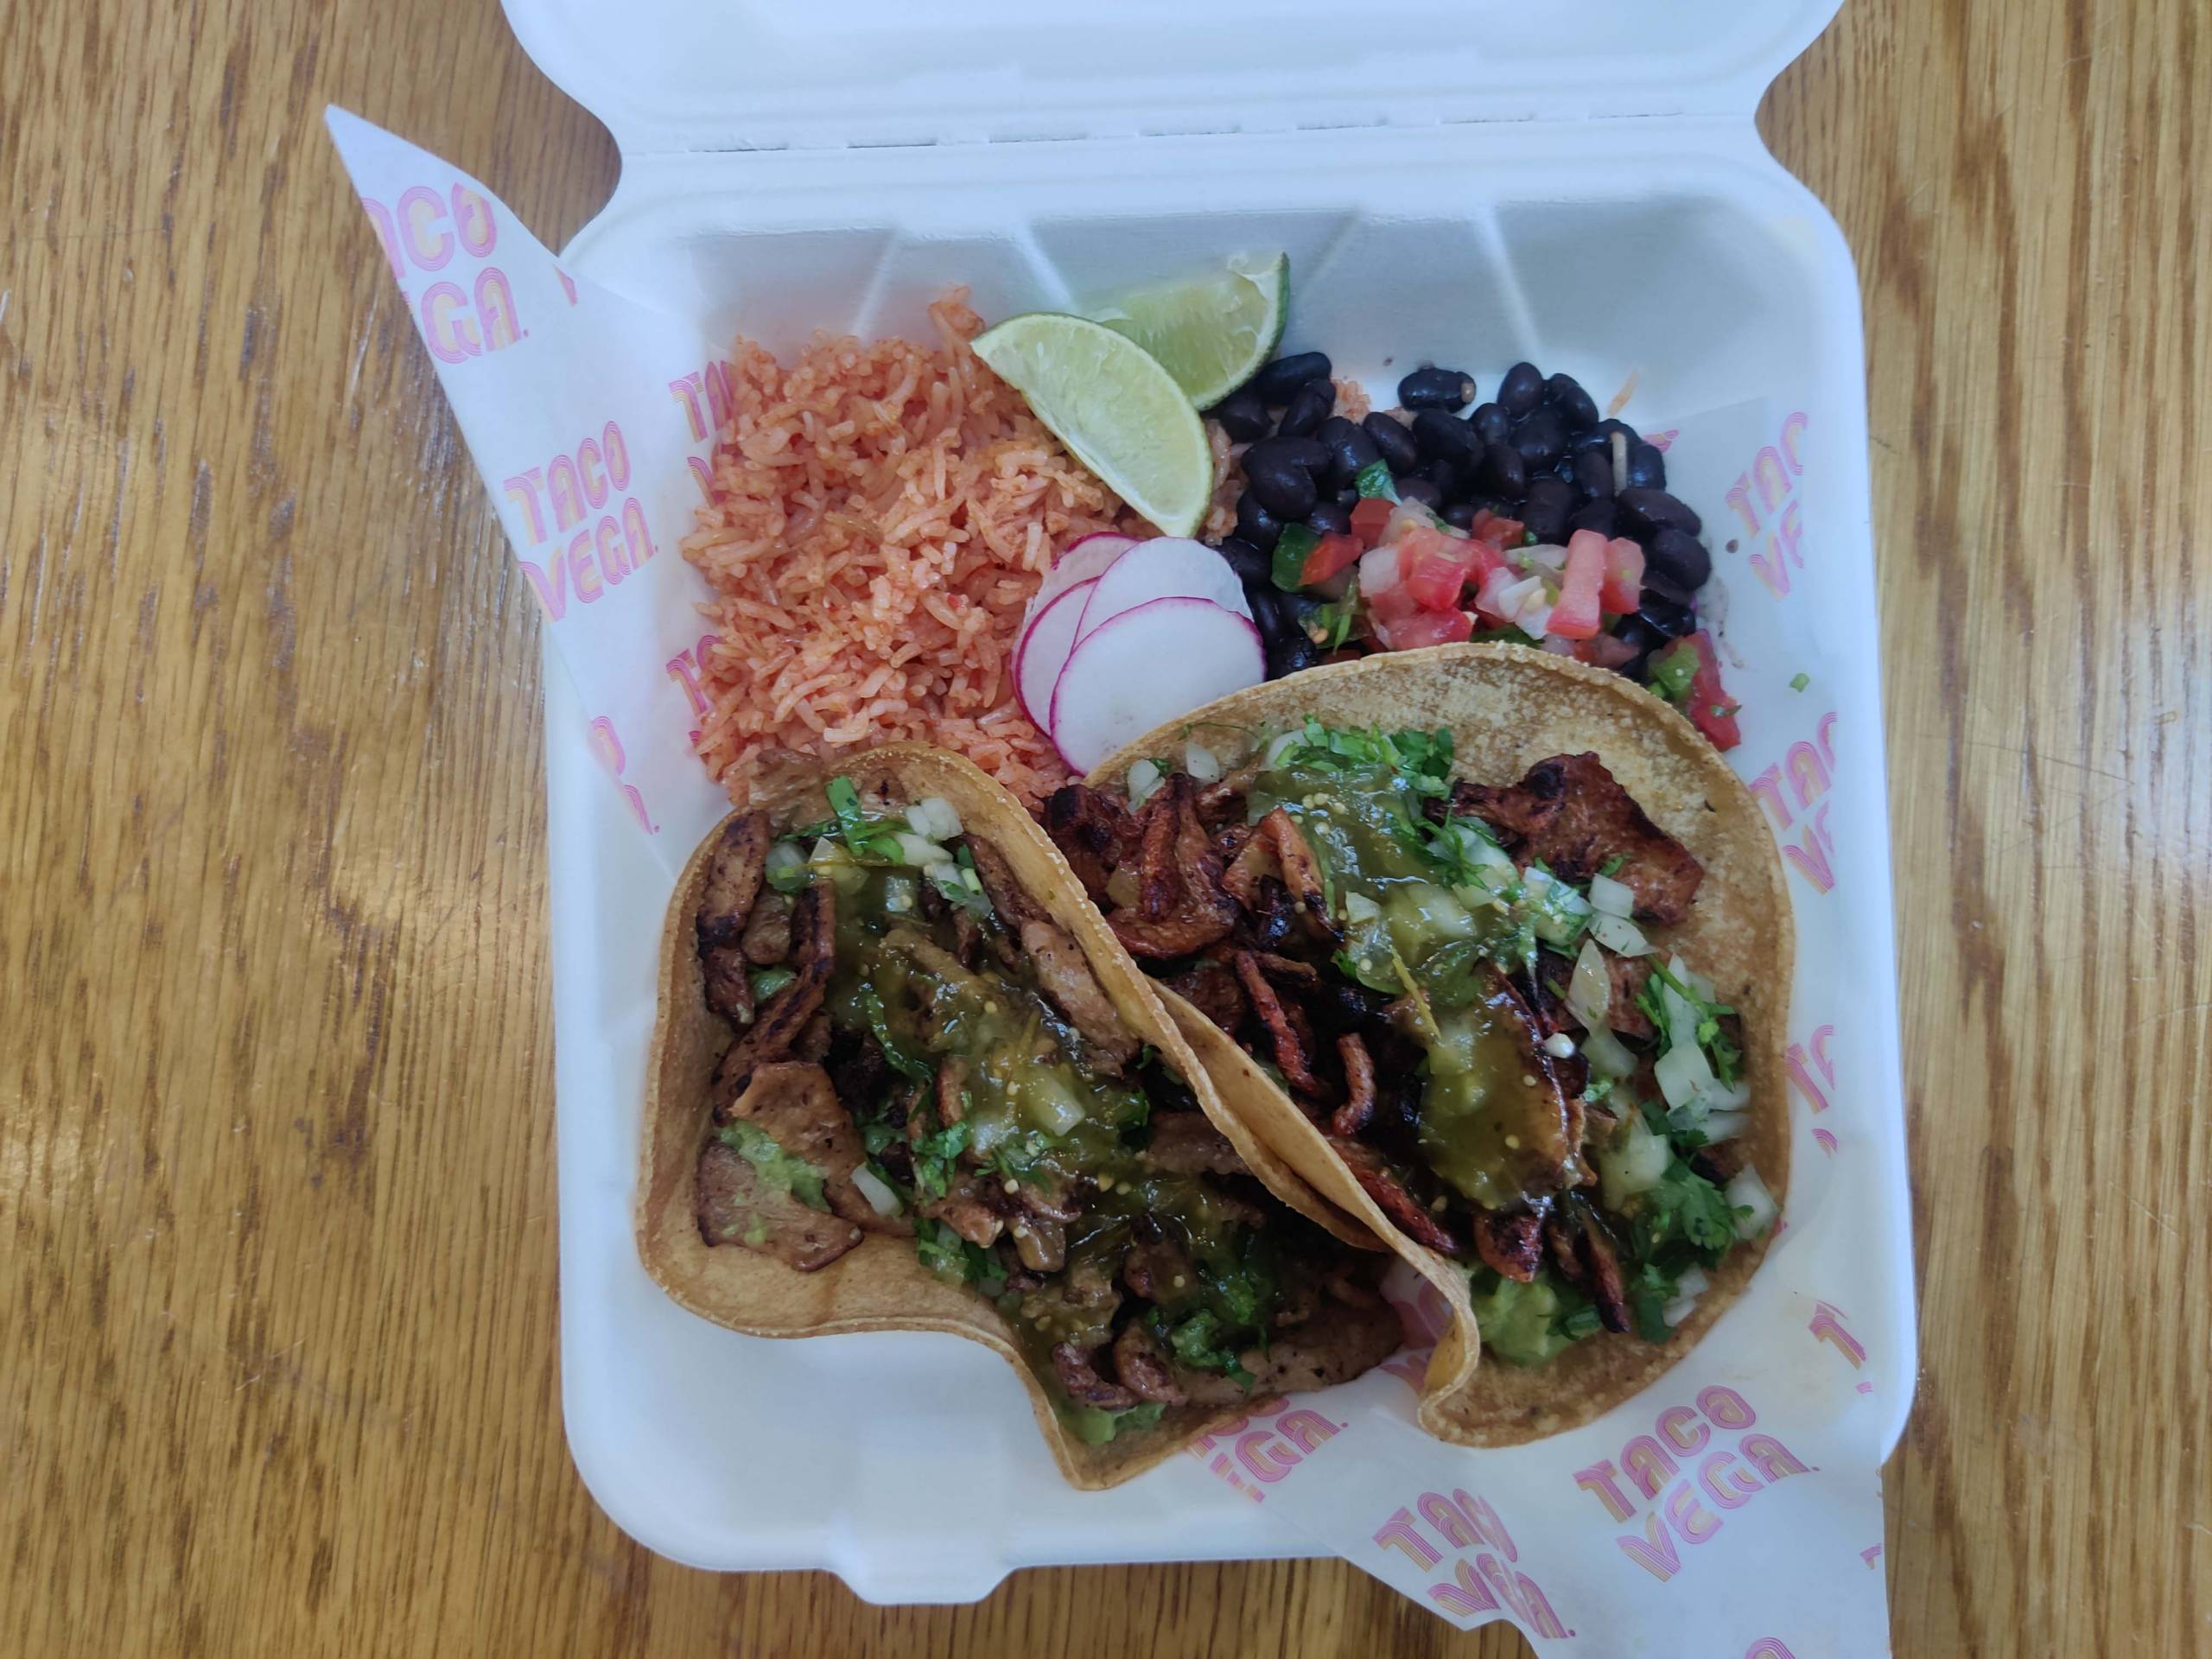 A styrofoam container with three tacos, rice, and beans.